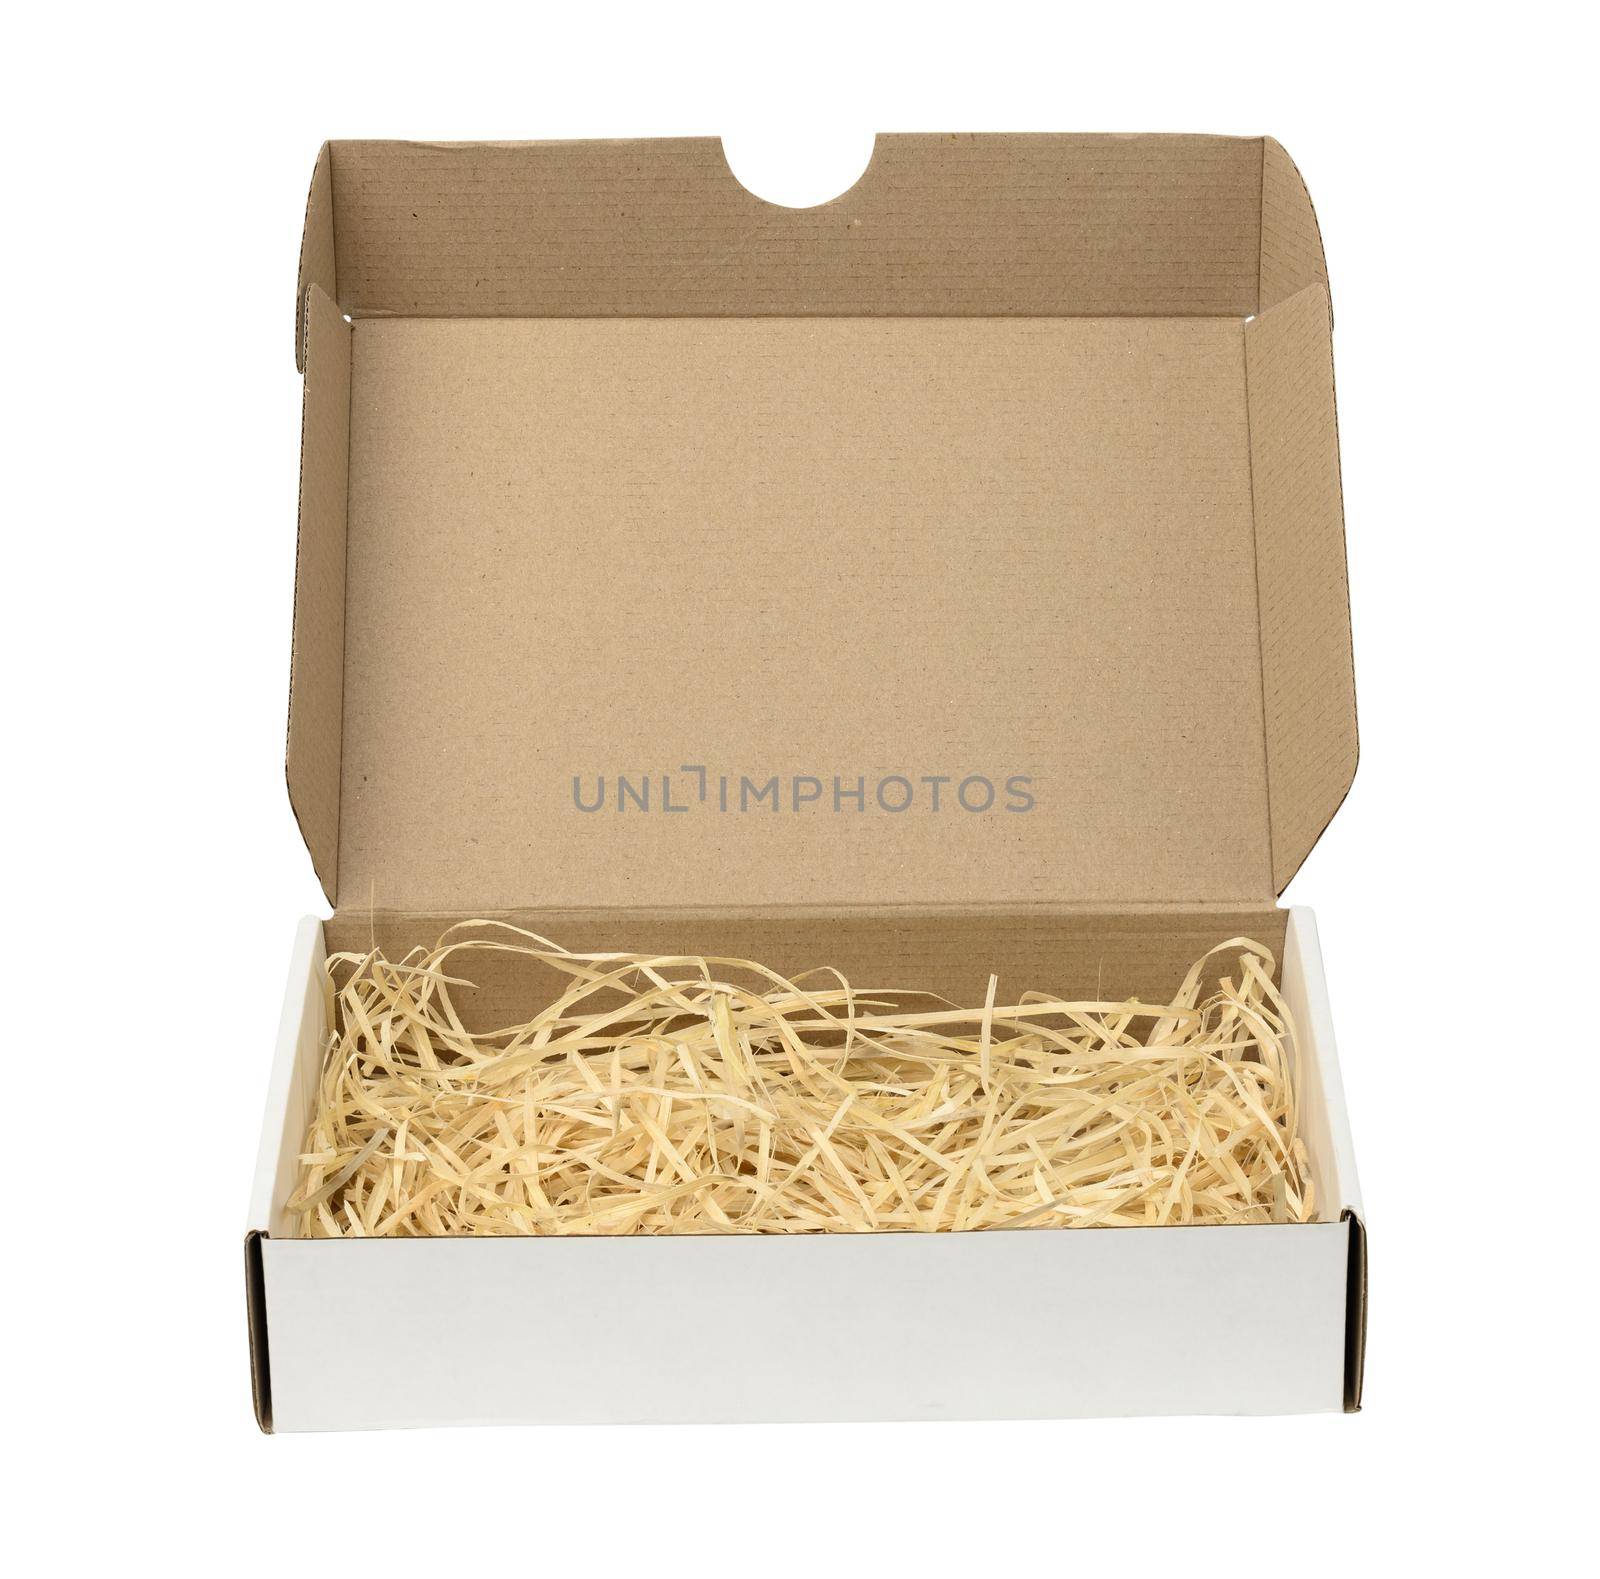 rectangular open corrugated paper box with sawdust inside. Packaging, containers for transportation